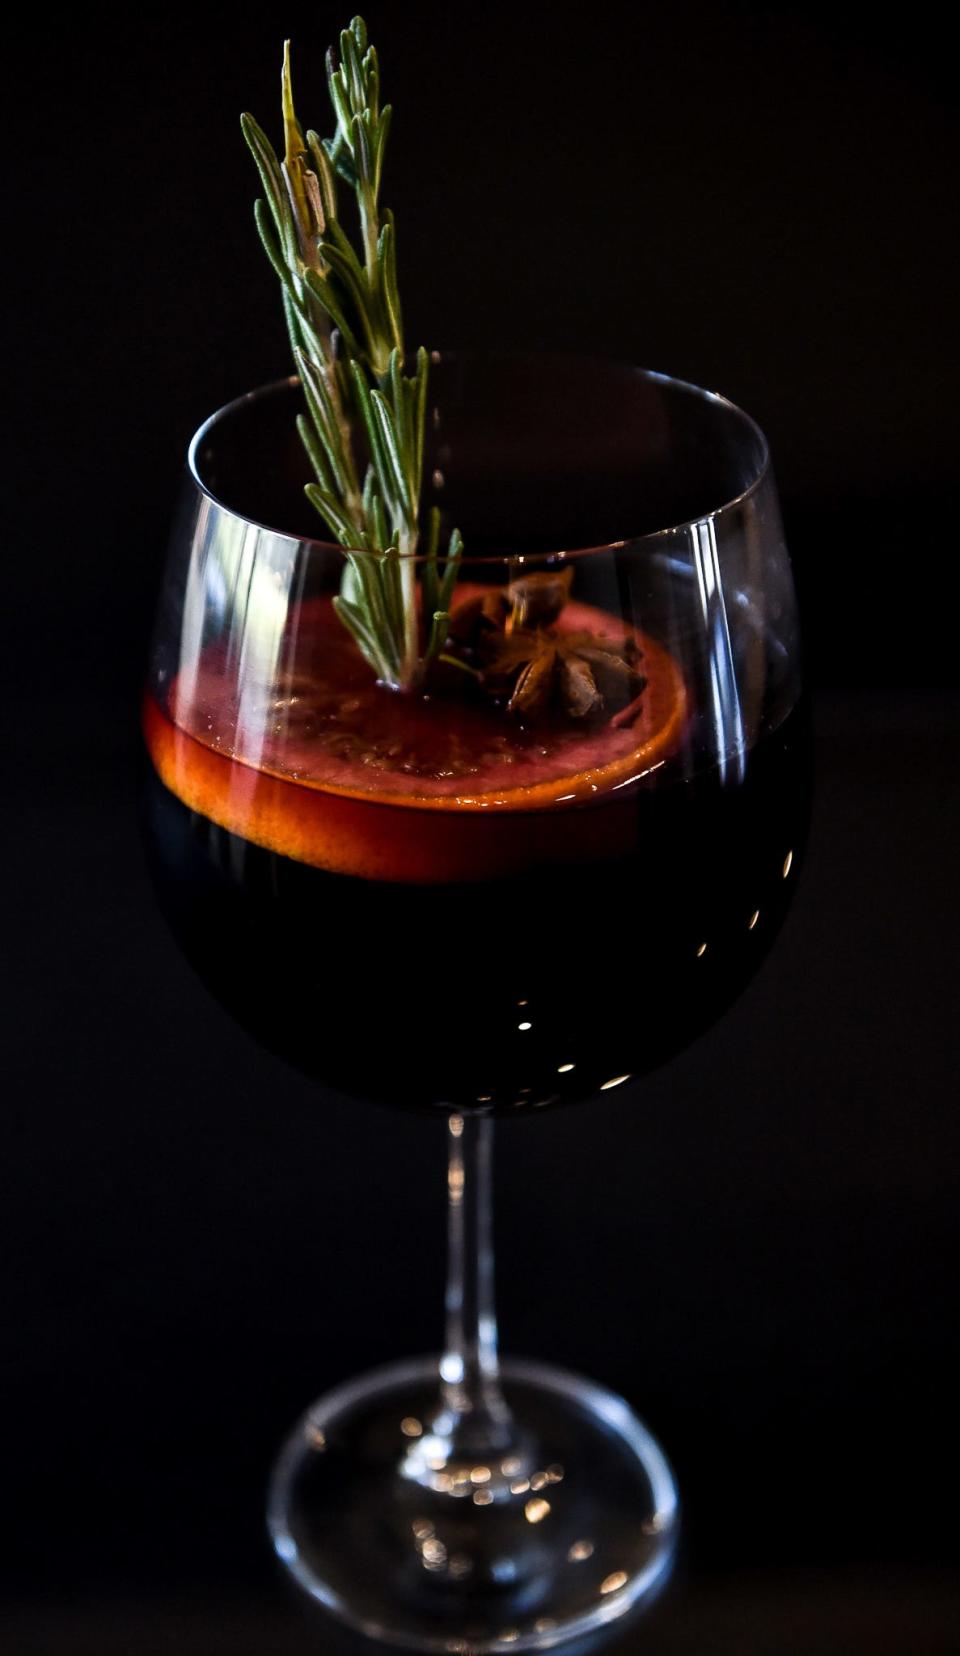 Mulled wine made with cinnamon, star anise and oranges is a warm, spicy cocktail for the holiday season and features local honey from Jackson's Footprint Farms.